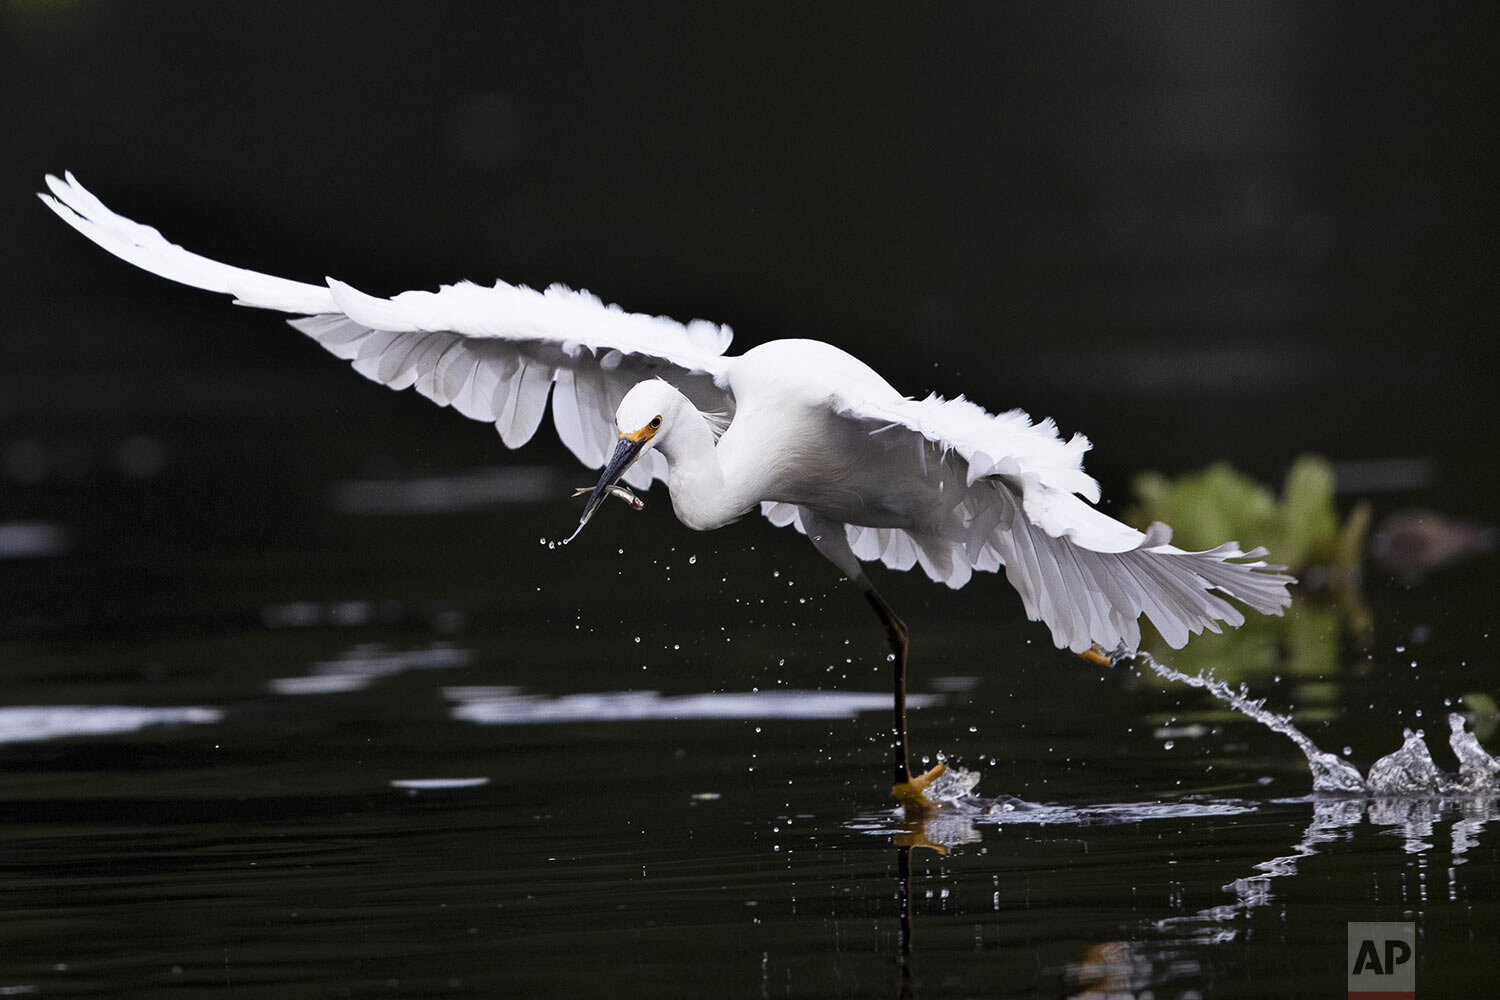  An egret catches a fish in the canals of Xochimilco, Mexico City, Aug. 12, 2021. The canals and floating gardens of Xochimilco are the last remnants of a vast water transport system built by the Aztecs to serve their capital of Tenochtitlán. (AP Pho